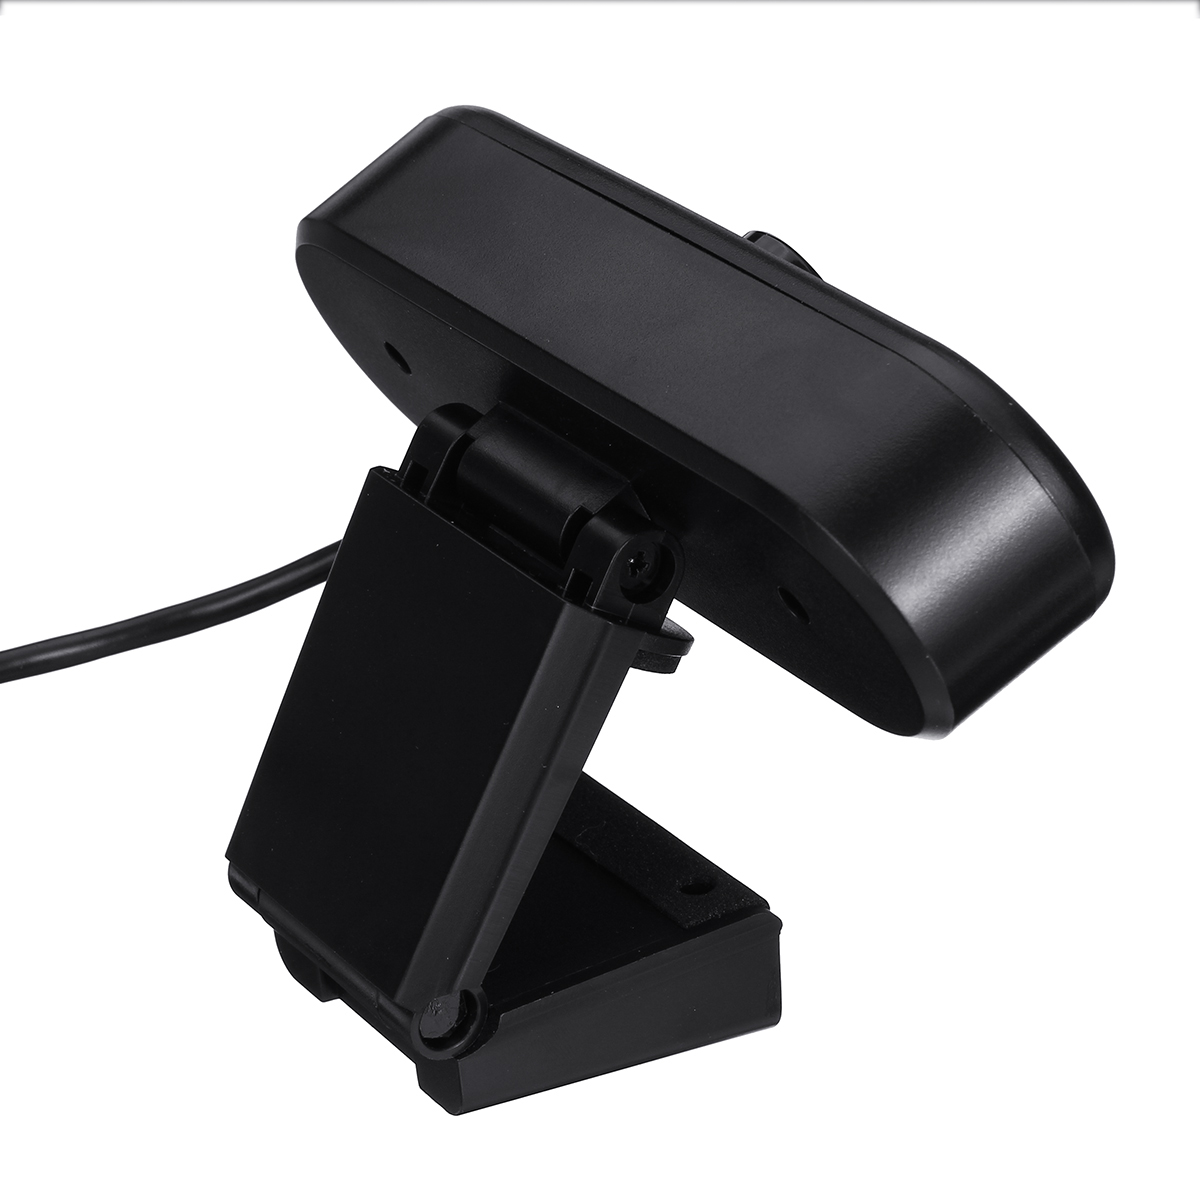 1080P-HD-USB-Webcam-Conference-Live-Manual-Focus-Computer-Camera-Built-in-Omni-directional-Micphone--1674541-5